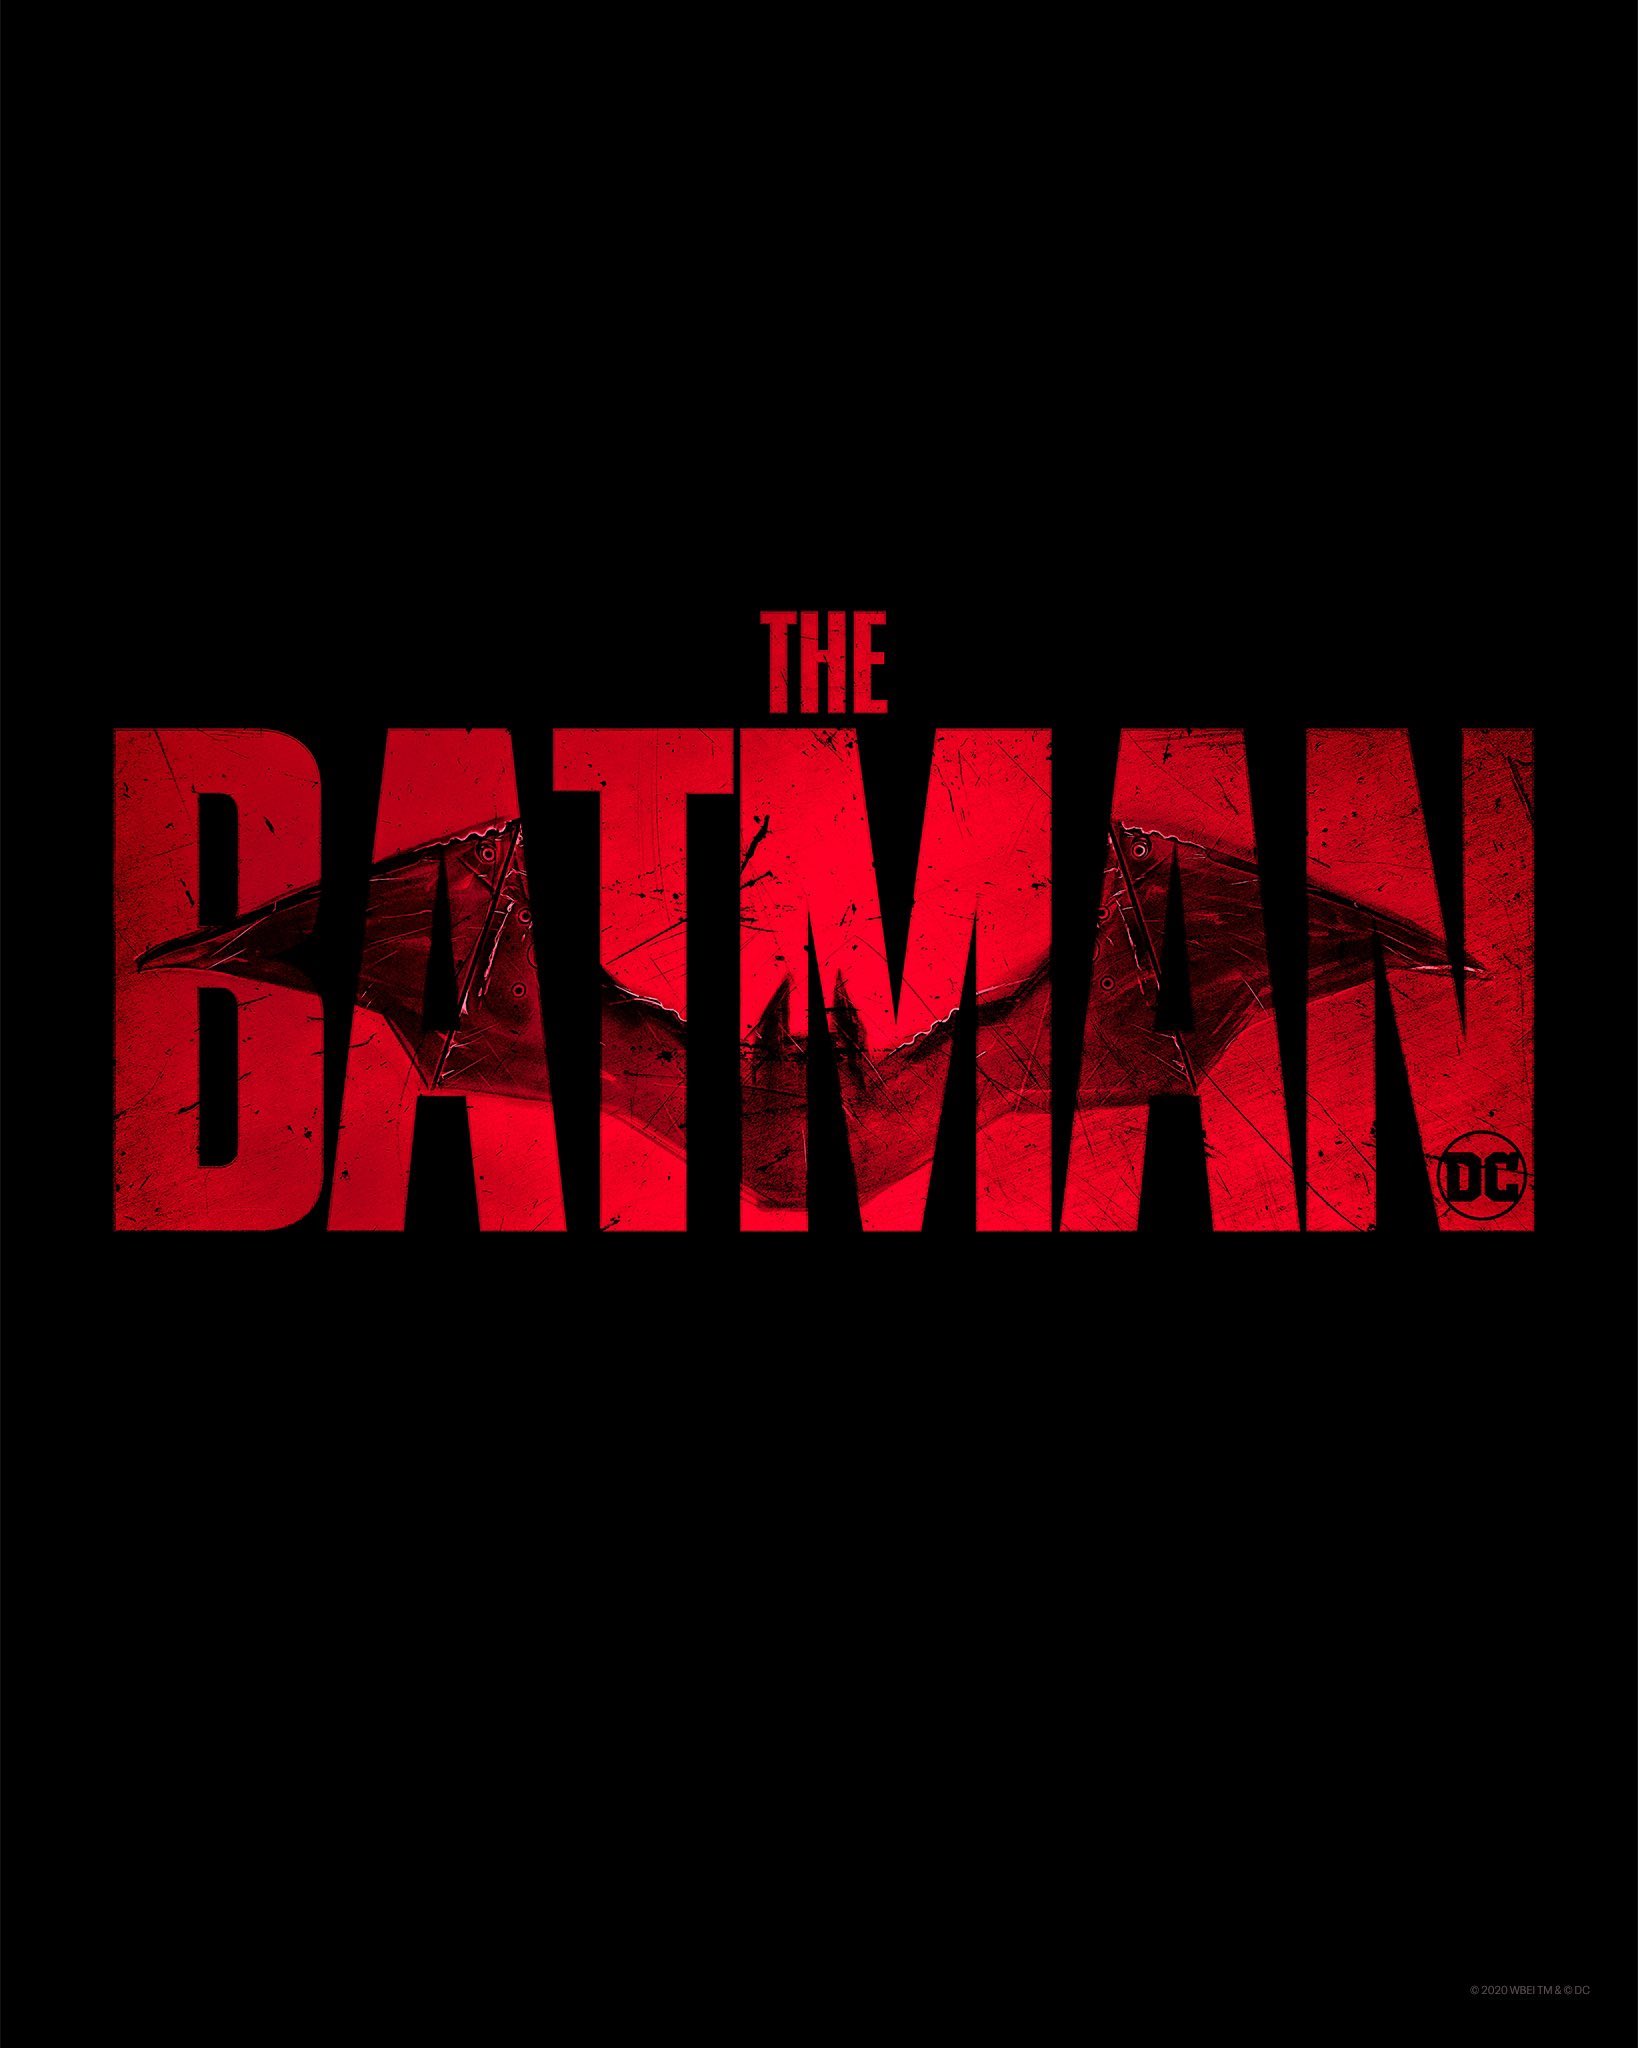 ‘The Batman’ Gets Pushed Back To 2022 Along With Other WB Movies